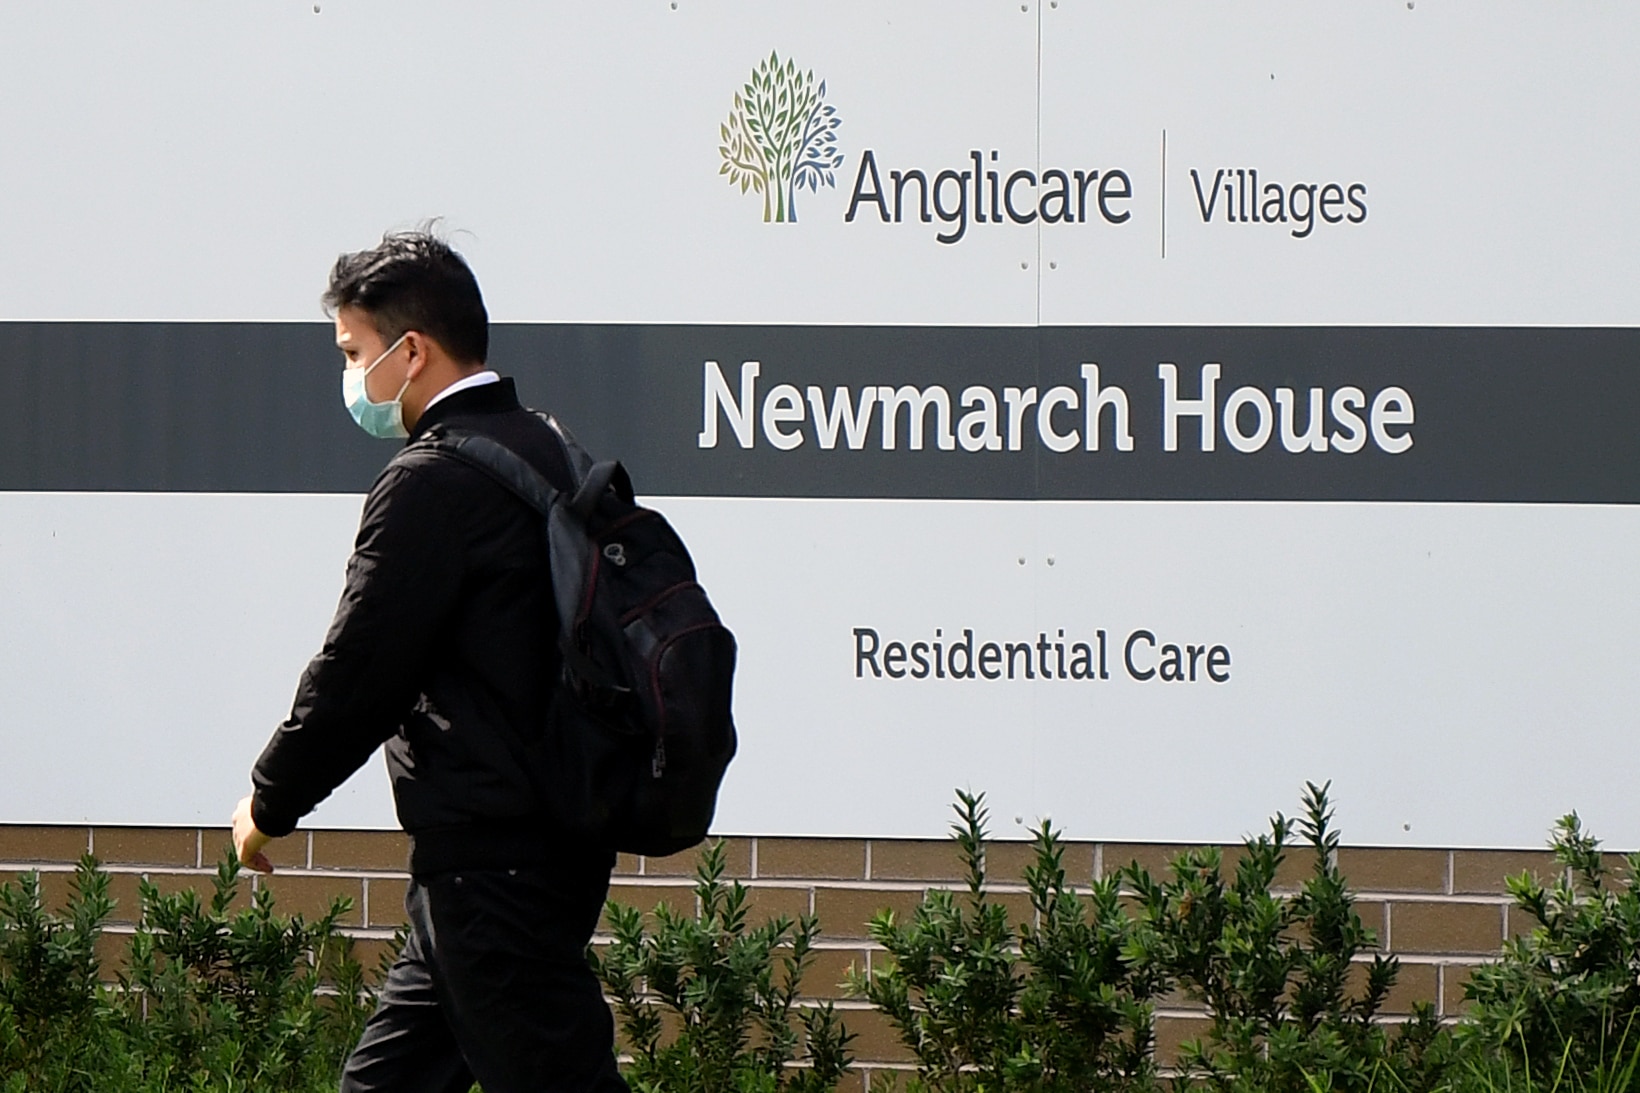 A worker leaves the Anglicare Newmarch House in Western Sydney.